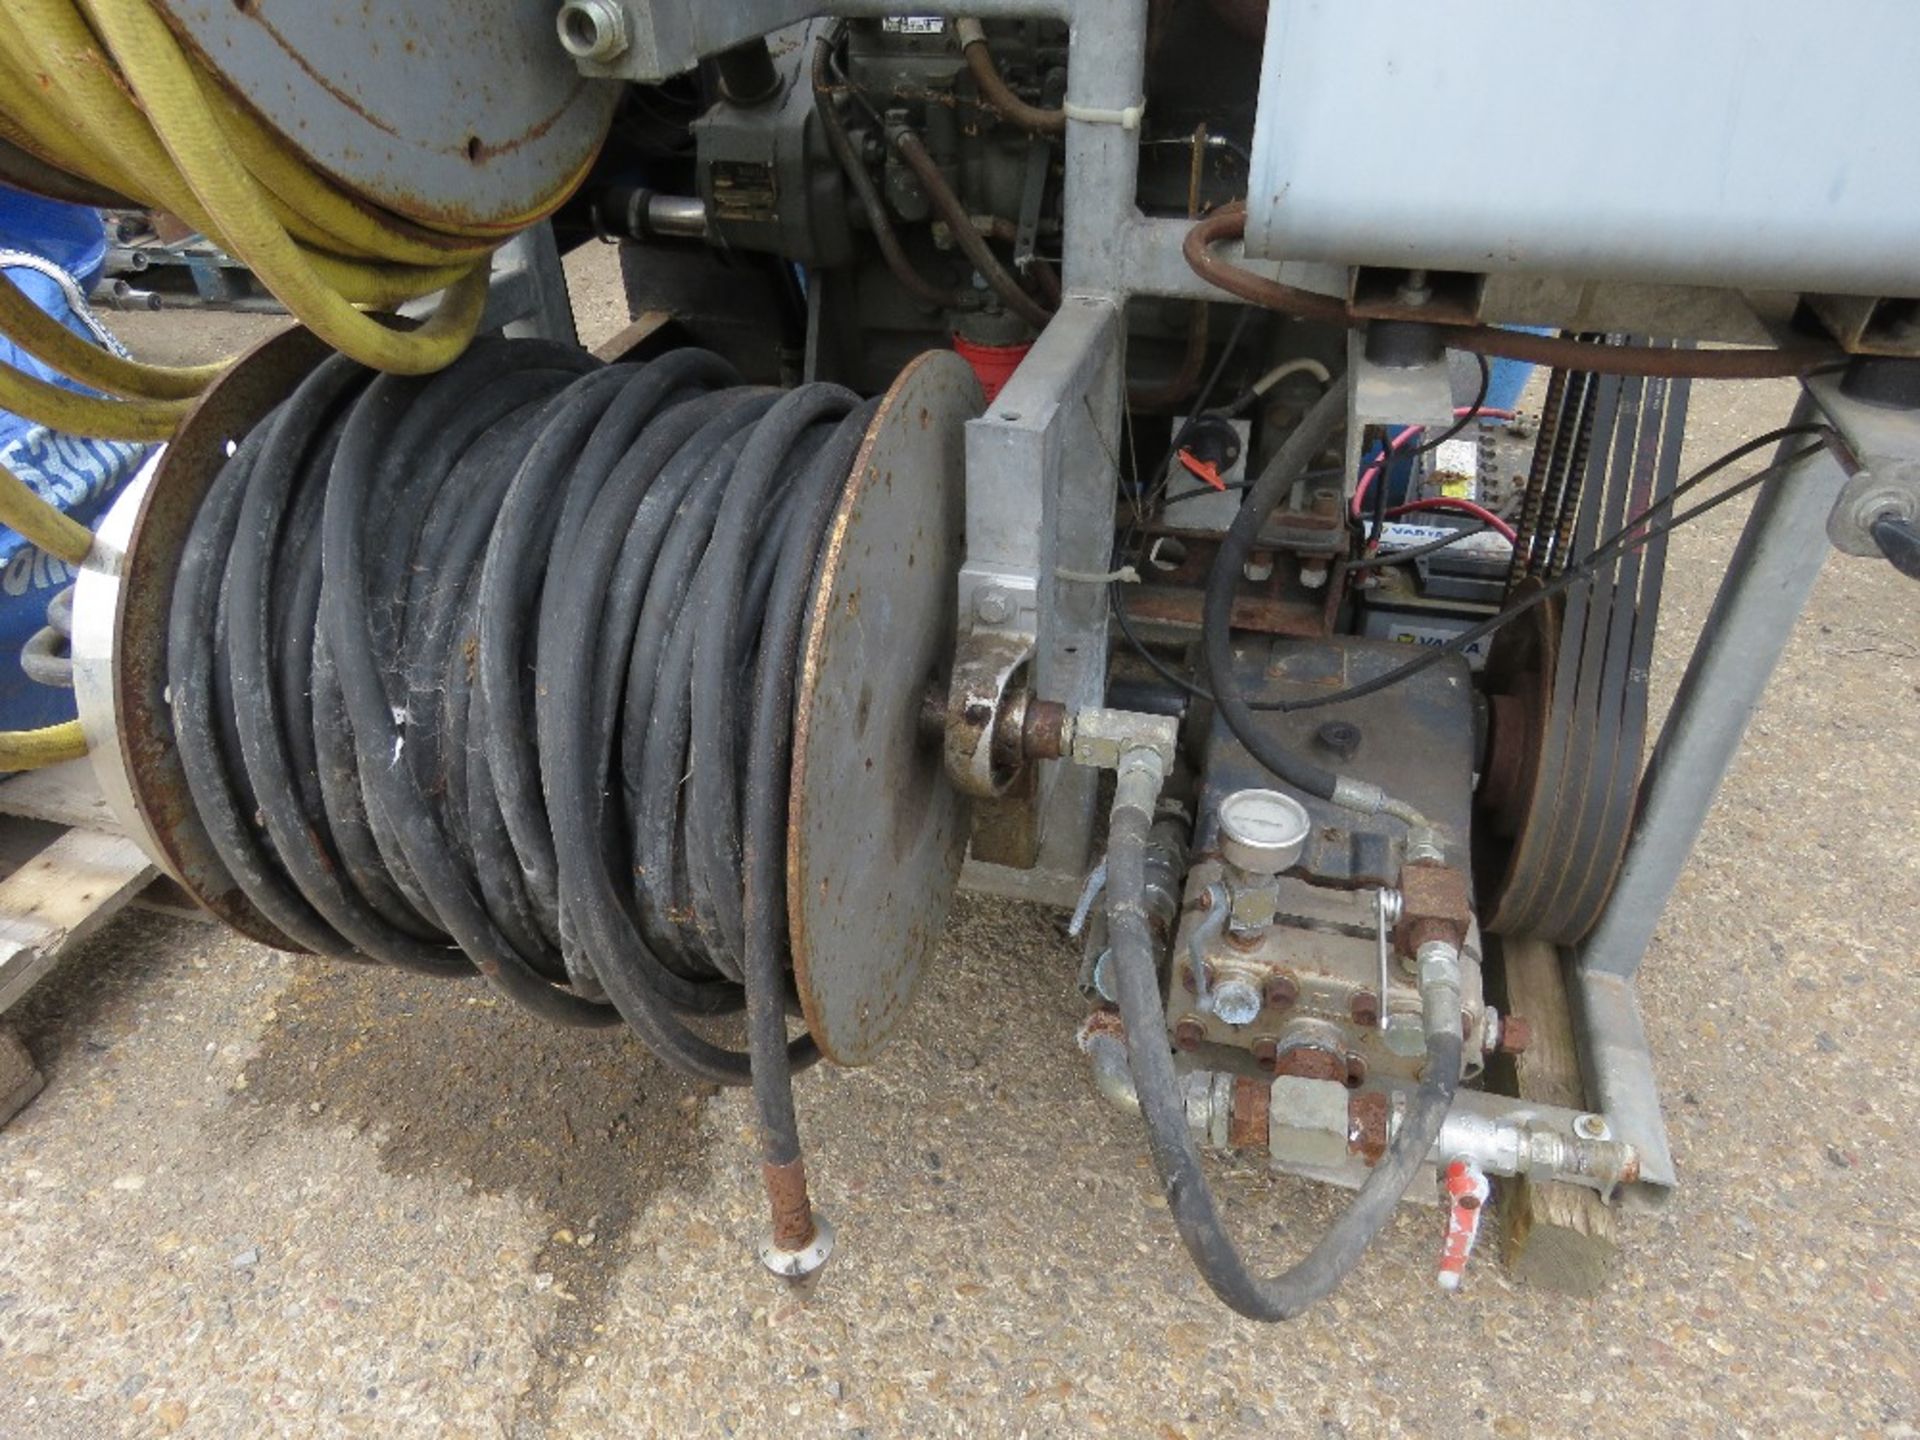 DEUTZ 3 CYLINDER POWERED HIGH PRESSURE DRAIN JETTER WITH TANK AND HOSE. WHEN TESTED WAS SEEN TO RUN - Image 4 of 5